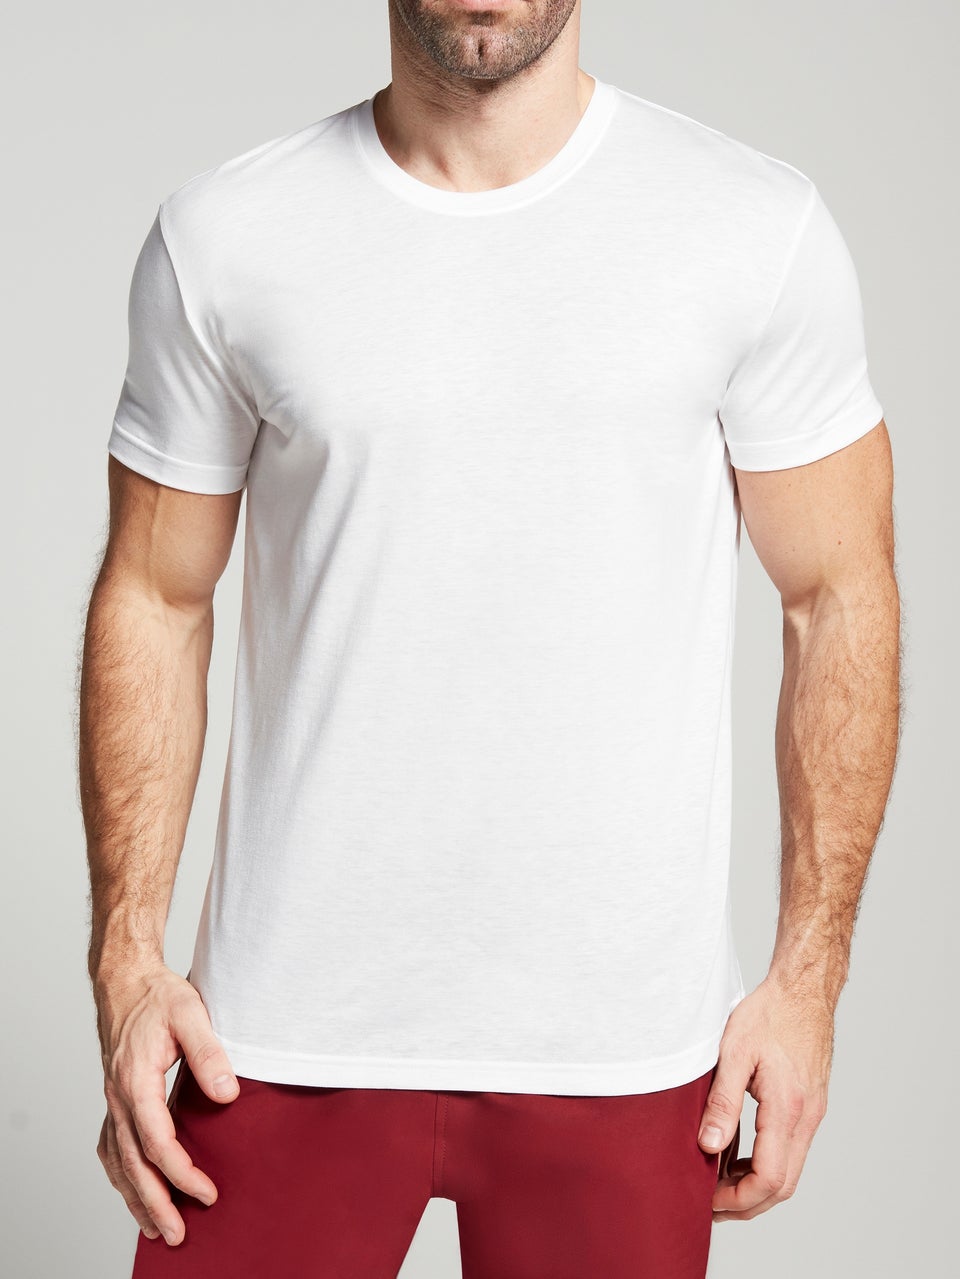 'The Actor' T-shirt - White